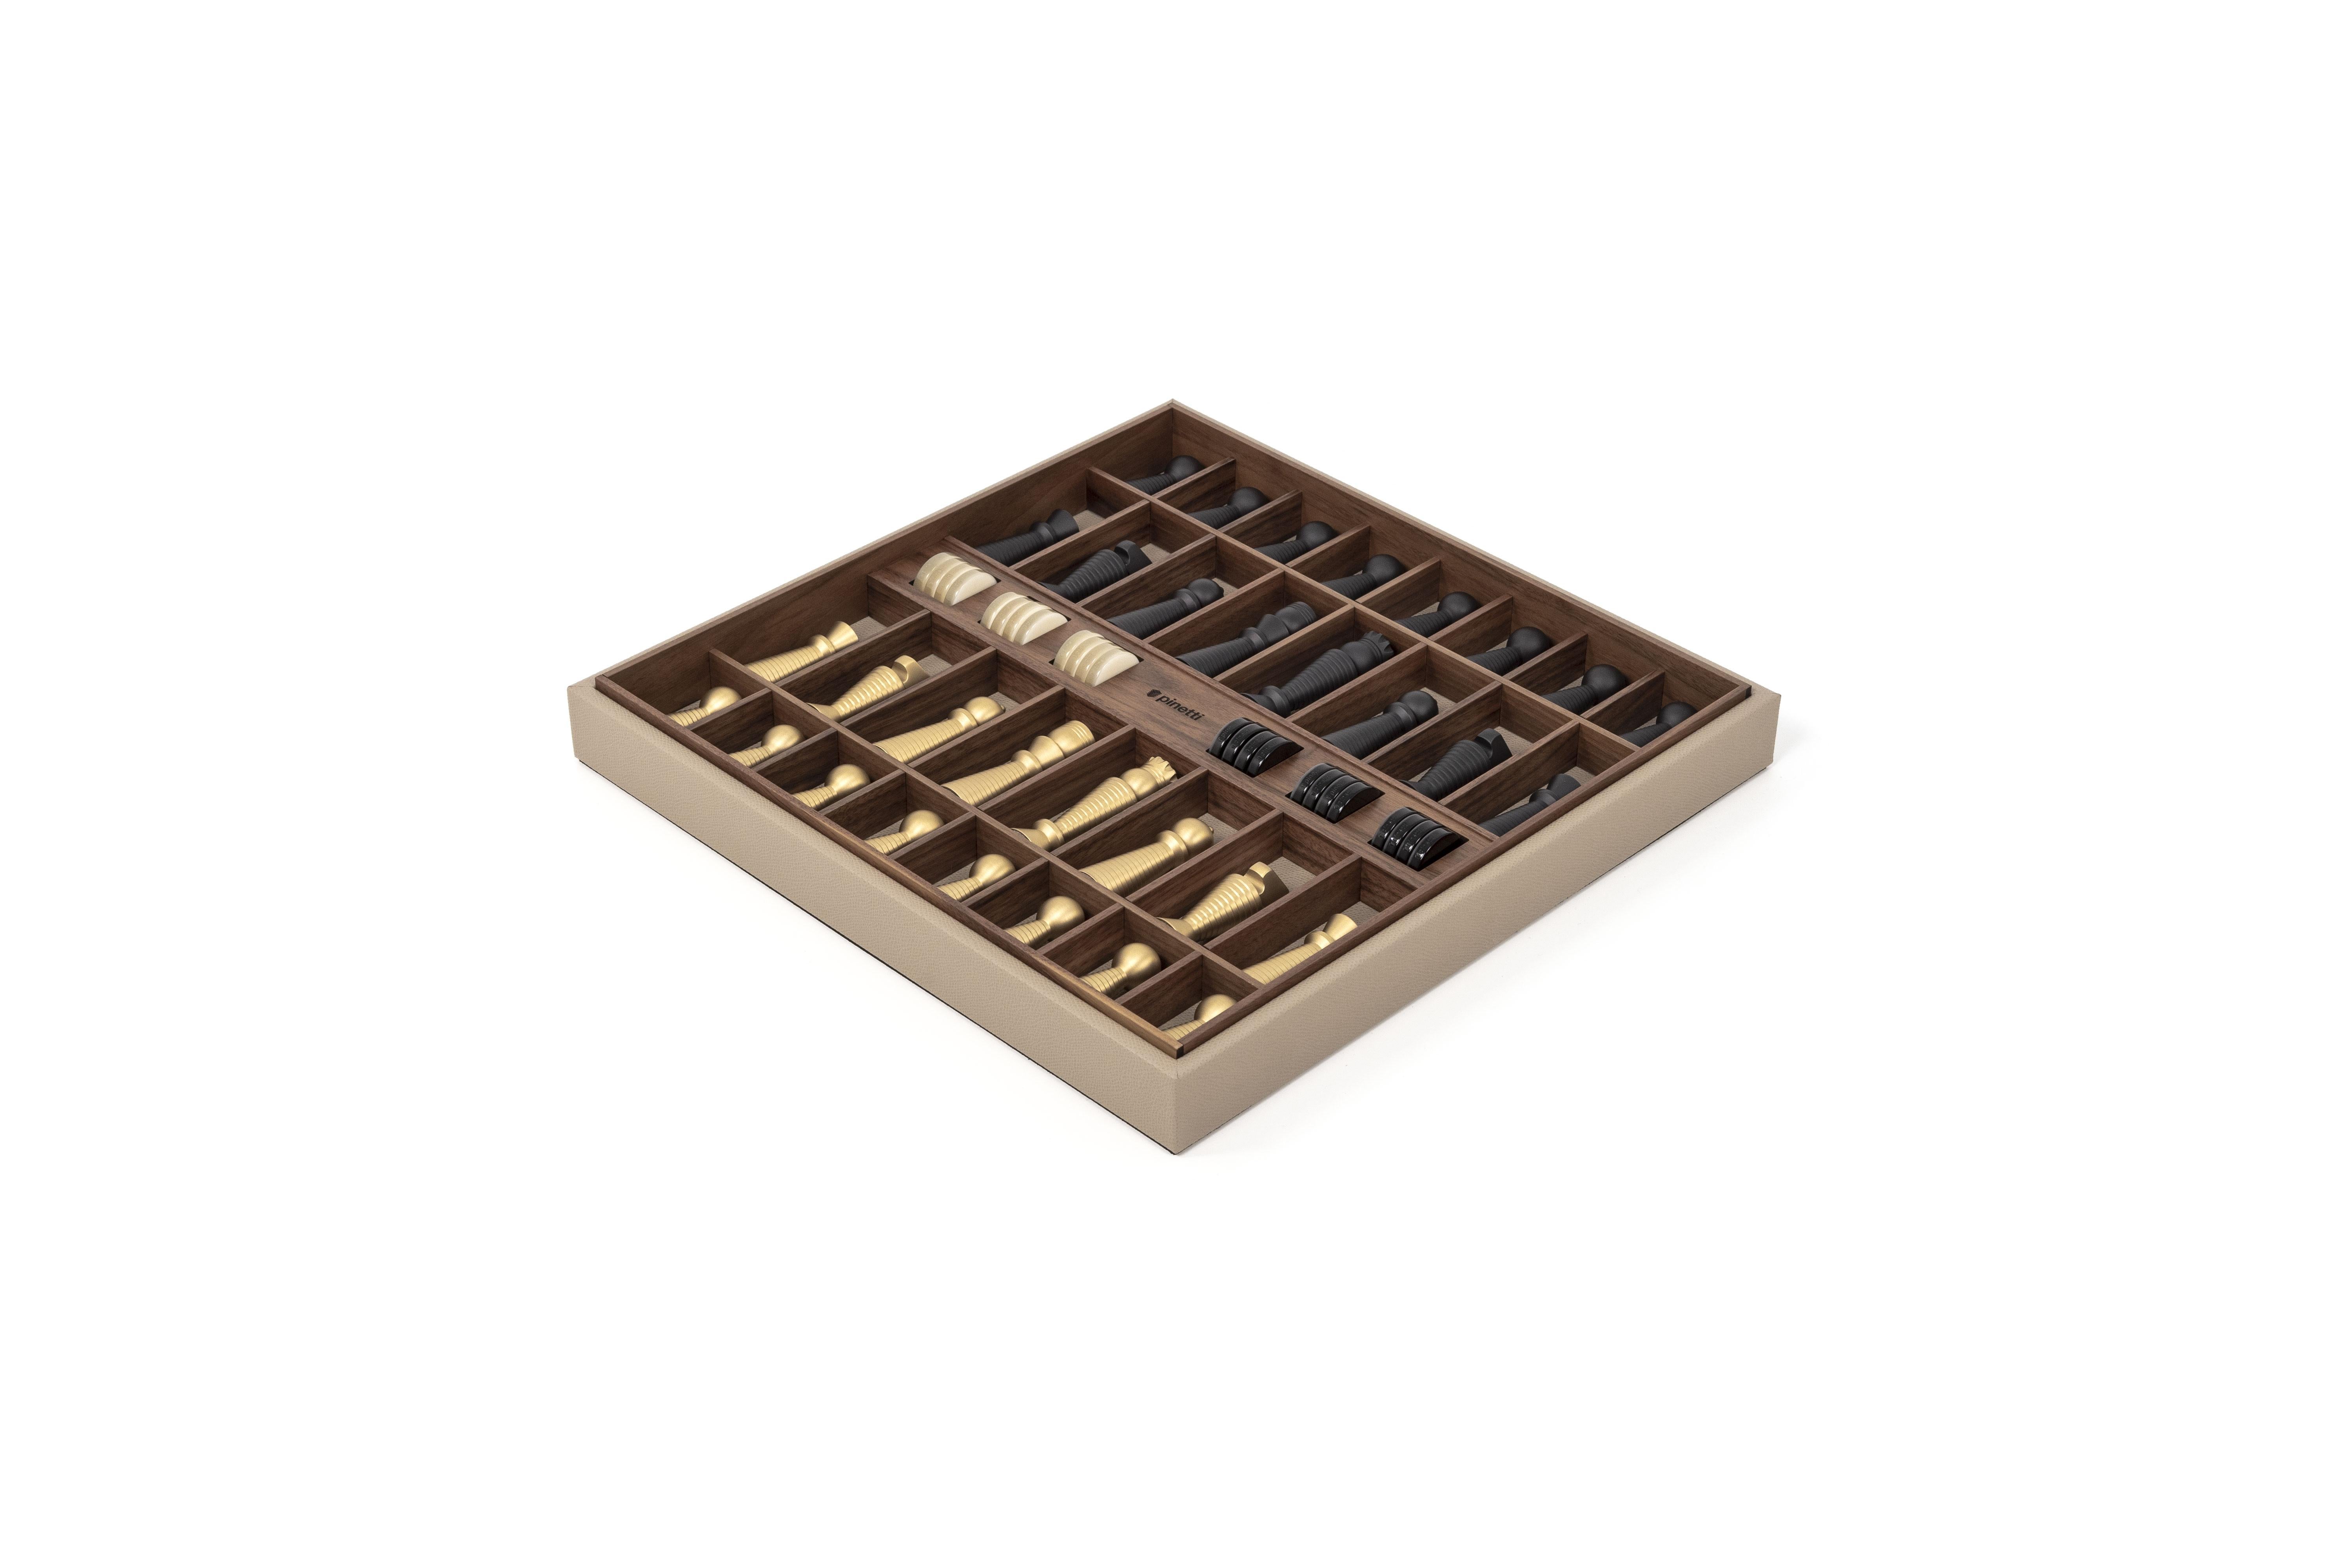 Two in one. A bicolour game board with an interior storage tray that houses the set’s pearled checkers and black and brass-finished chess pieces.

The class of a noble material such as walnut wood perfectly matches with the timeless beauty of